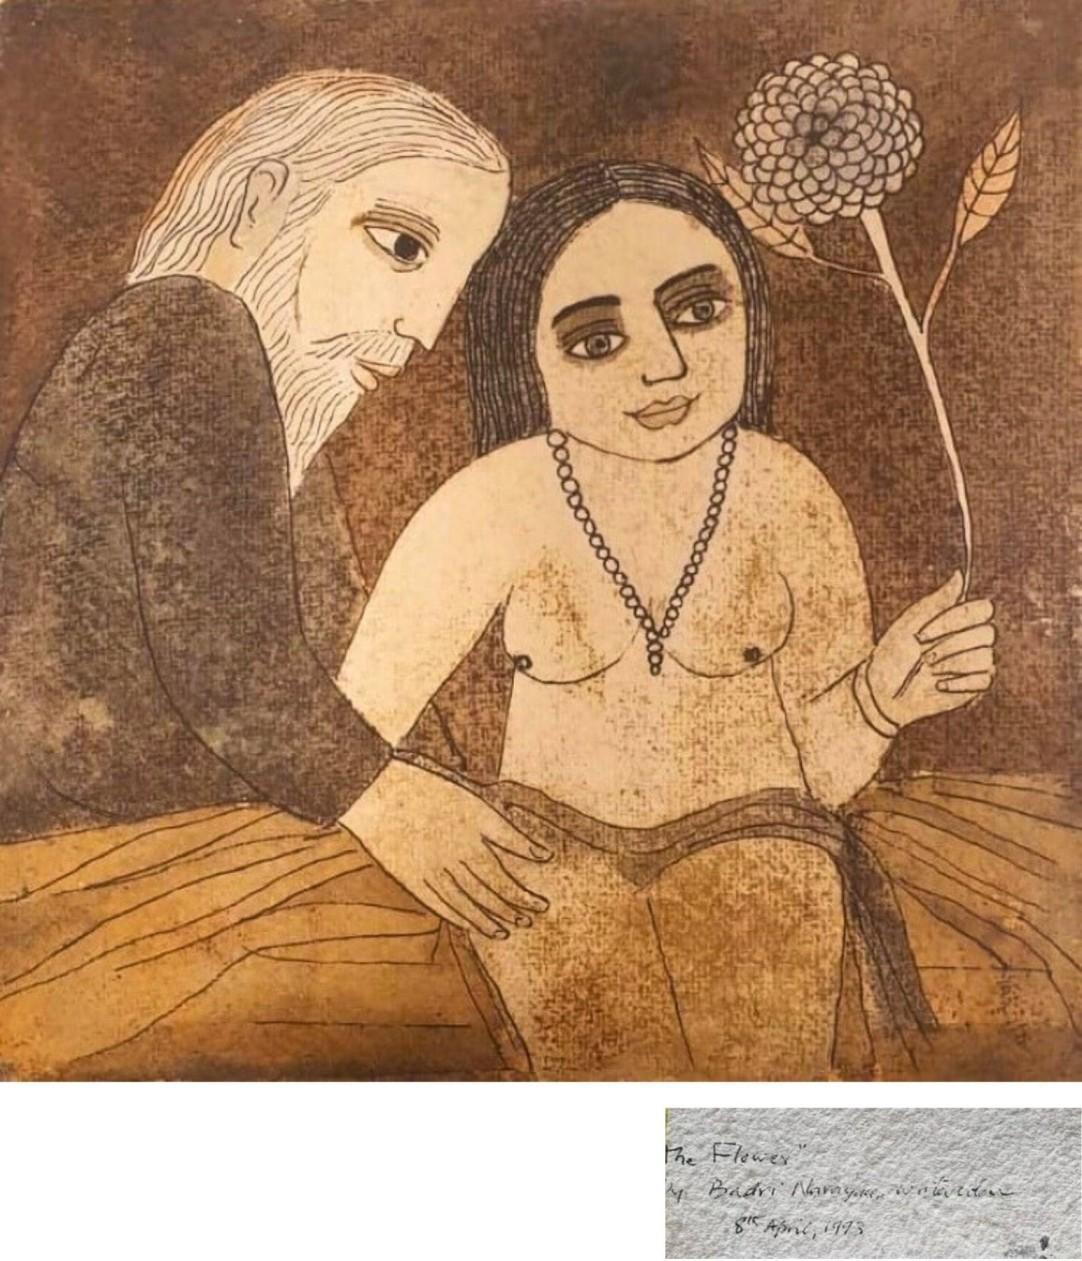 Badri Narayan Figurative Painting - The Flower Water colour on Paper Grey, Brown by Indian Artist"In Stock"